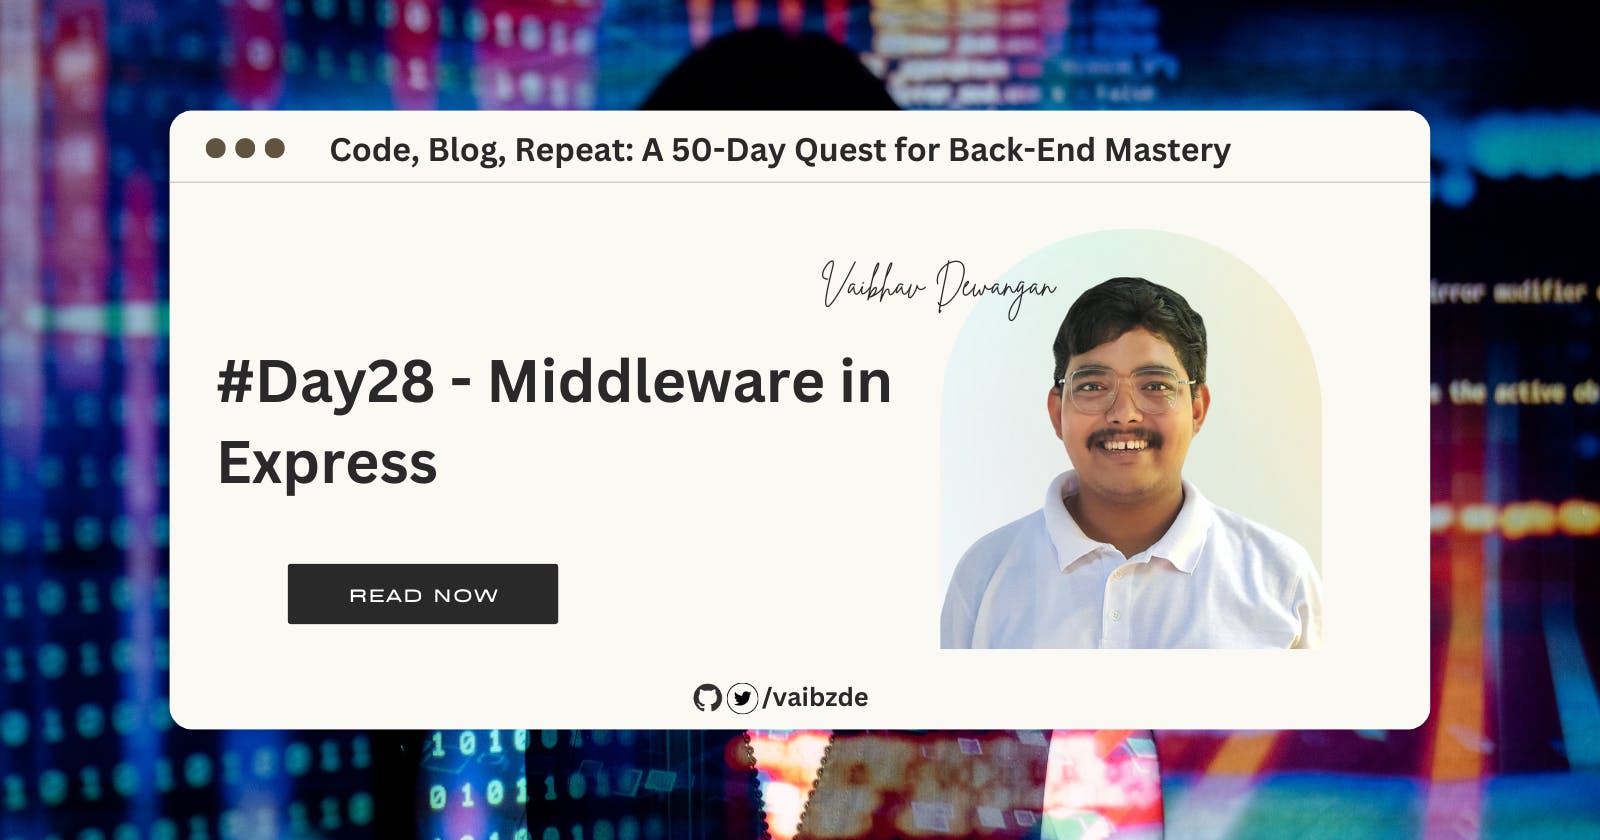 #Day28 - Middleware in Express